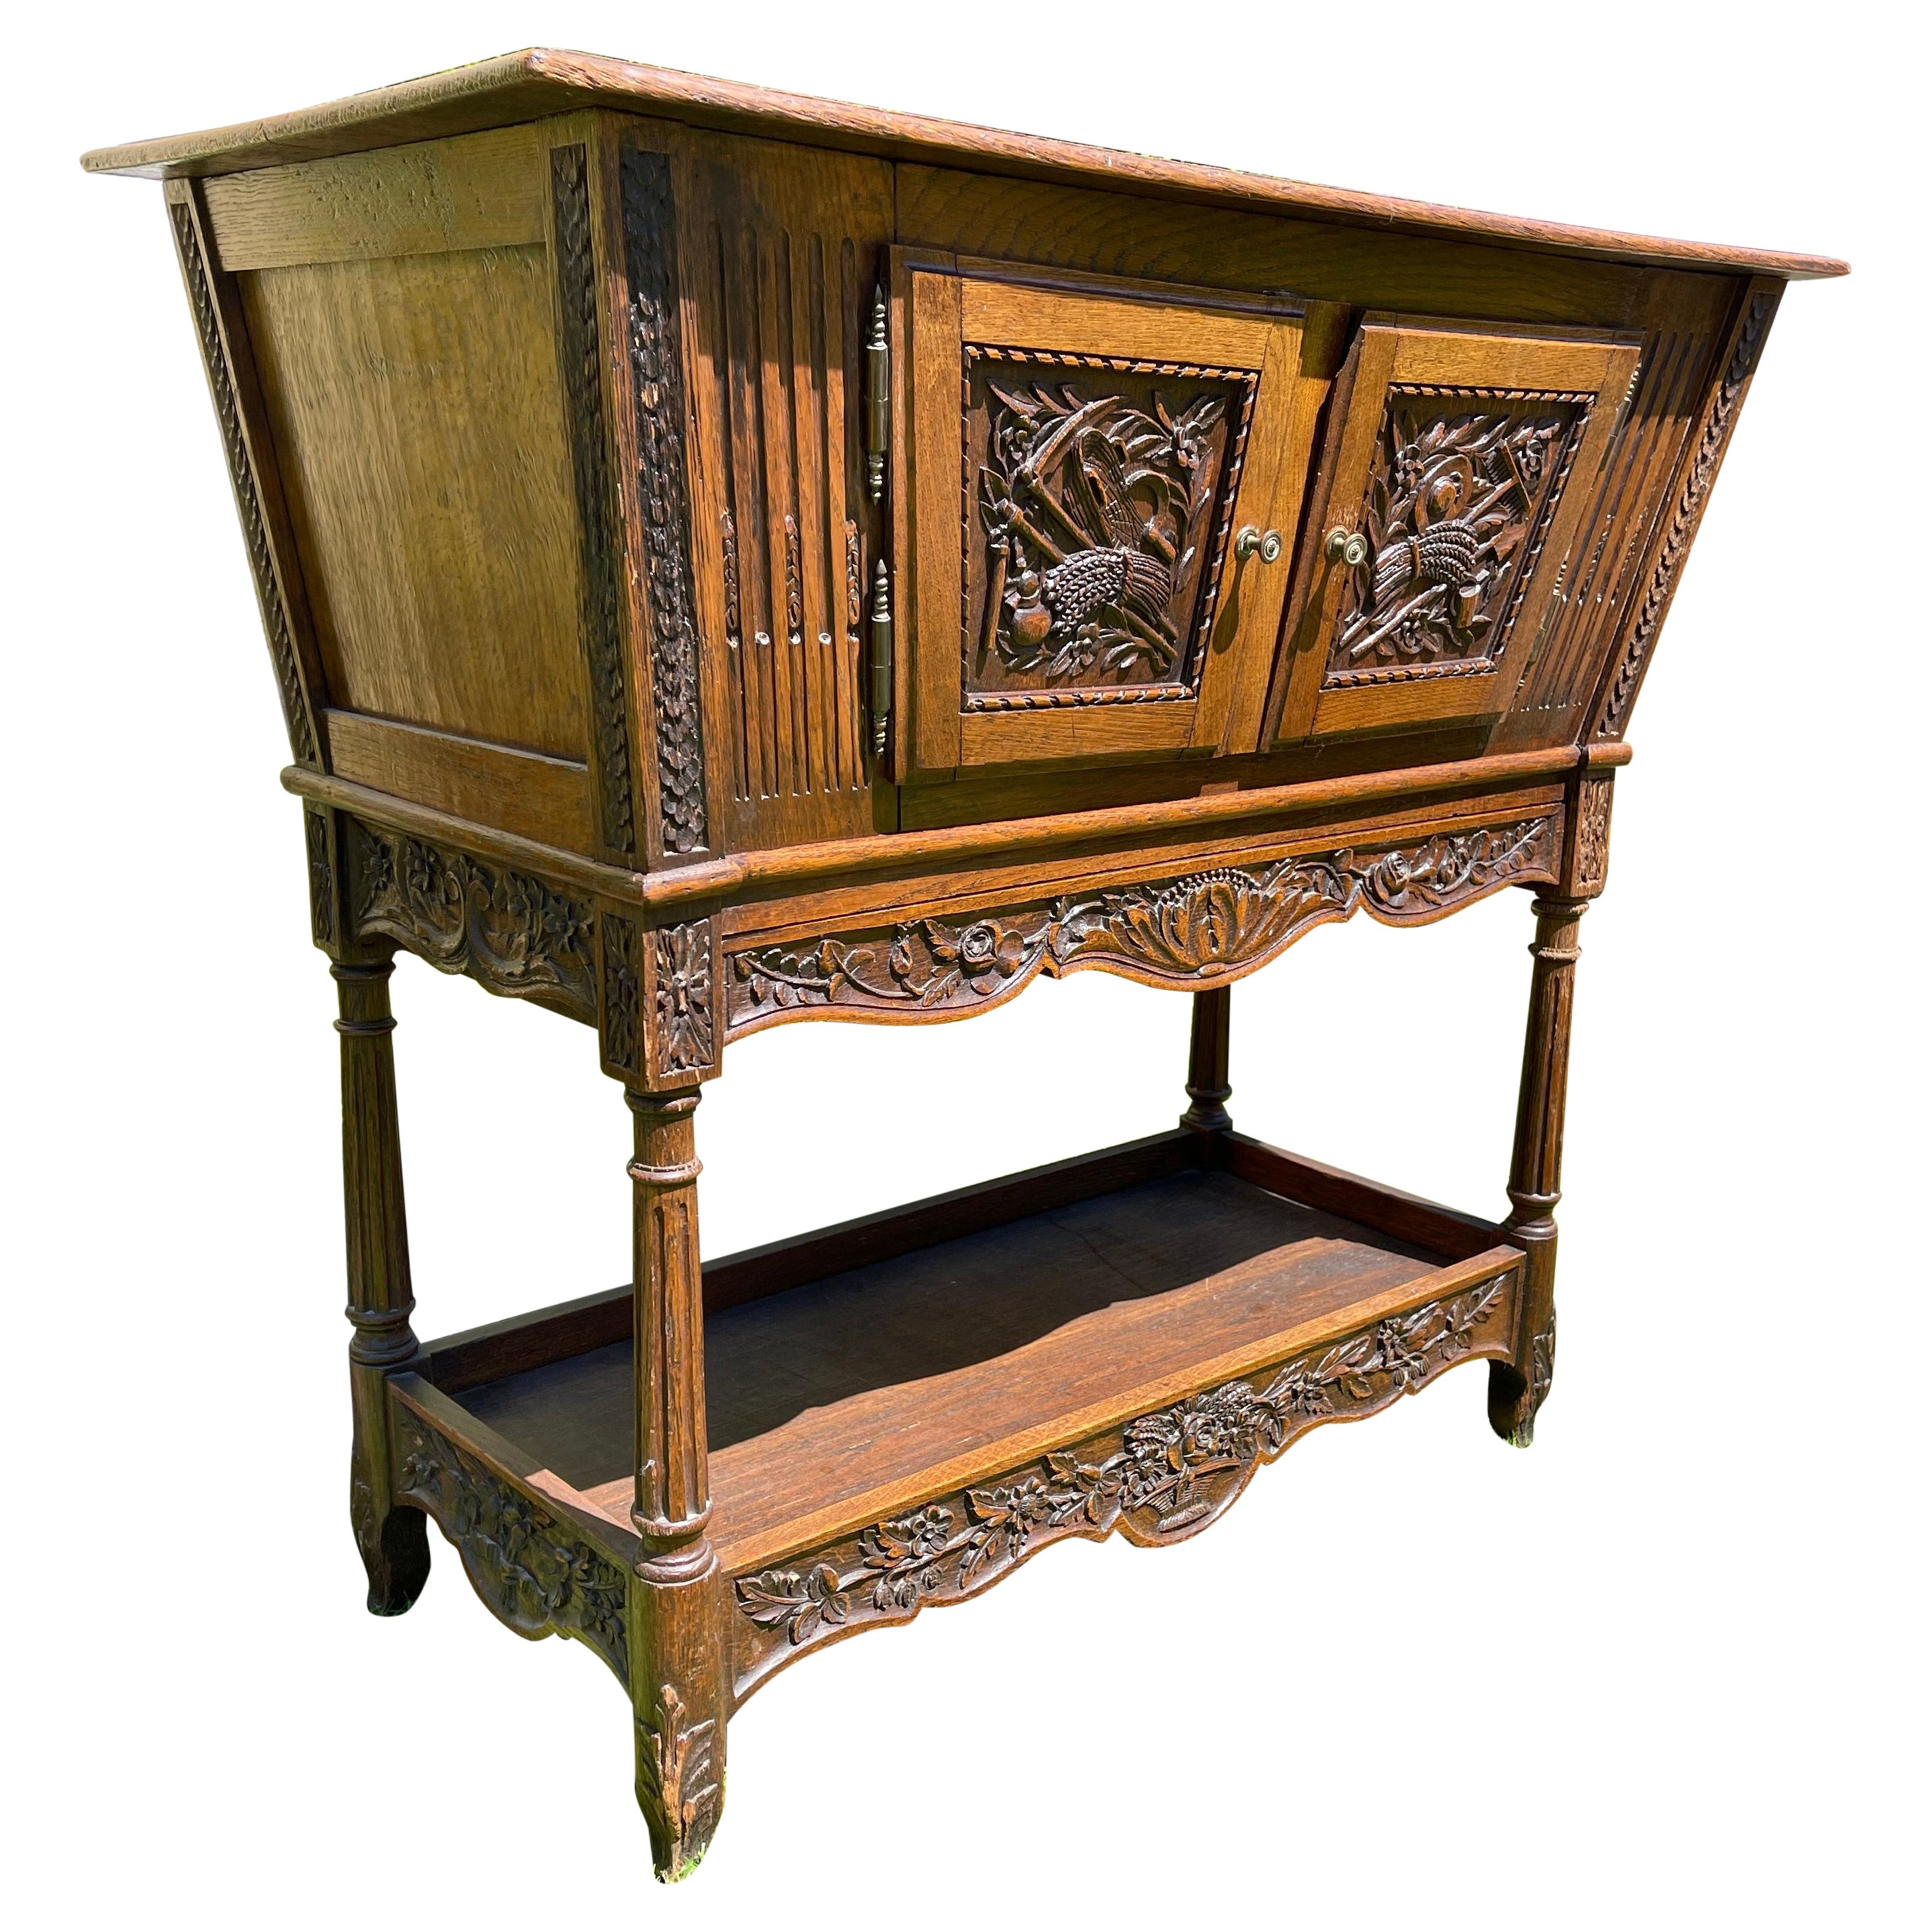 Provencal Style, French Oak Cabinet, 19th Century